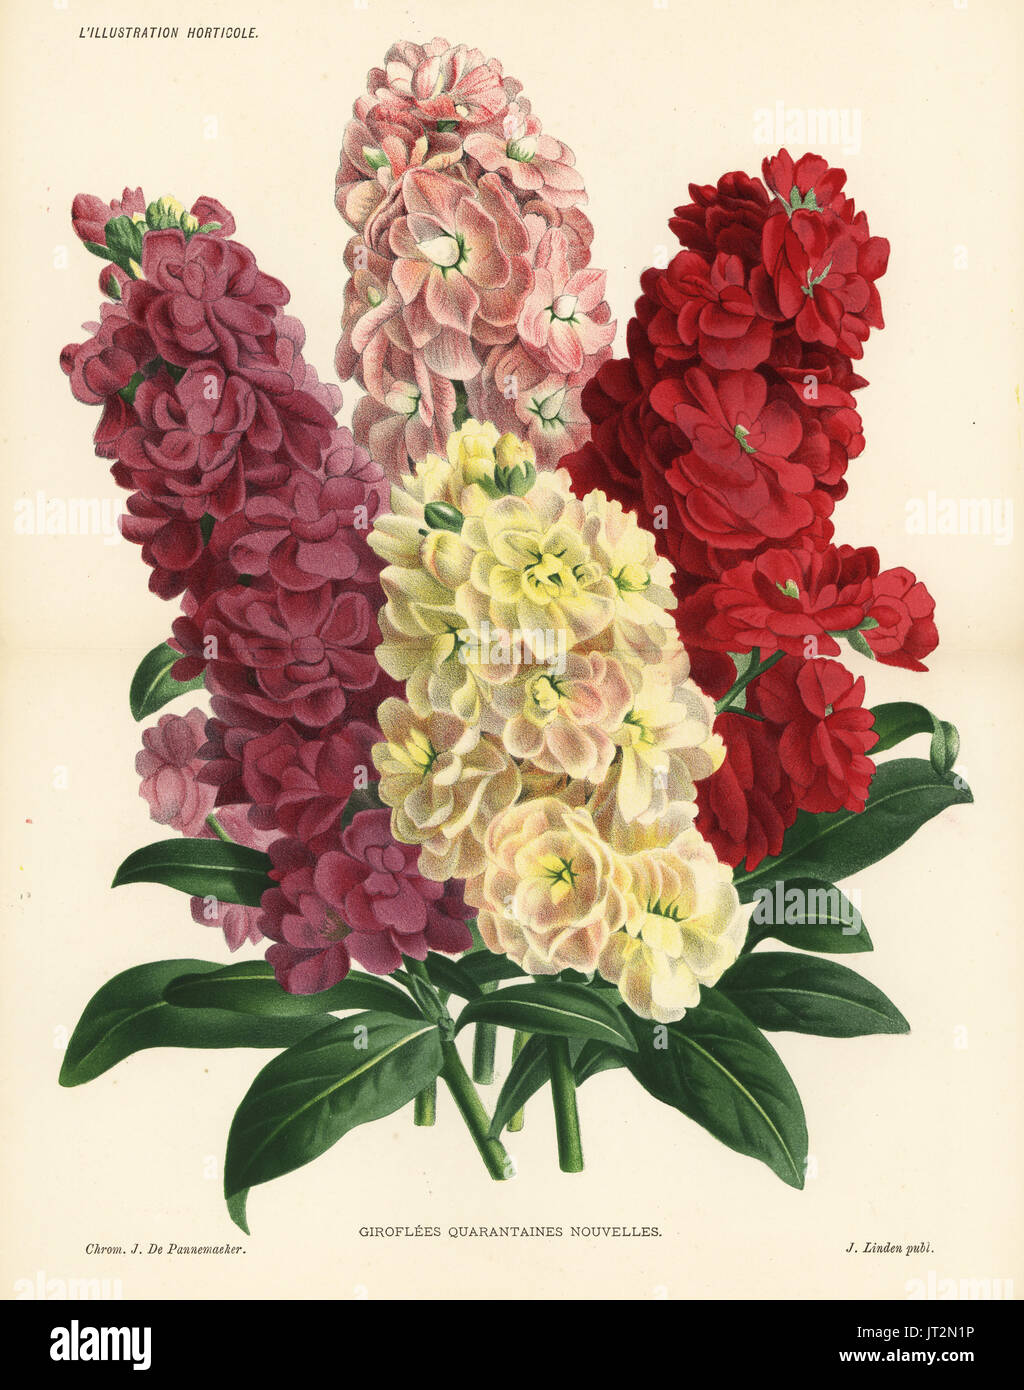 New varieties of hoary stock, Matthiola incana (Giroflees quarantaines nouvelles). Chromolithograph by J. de Pannemaeker from Jean Linden's l'Illustration Horticole, Brussels, 1885. Stock Photo